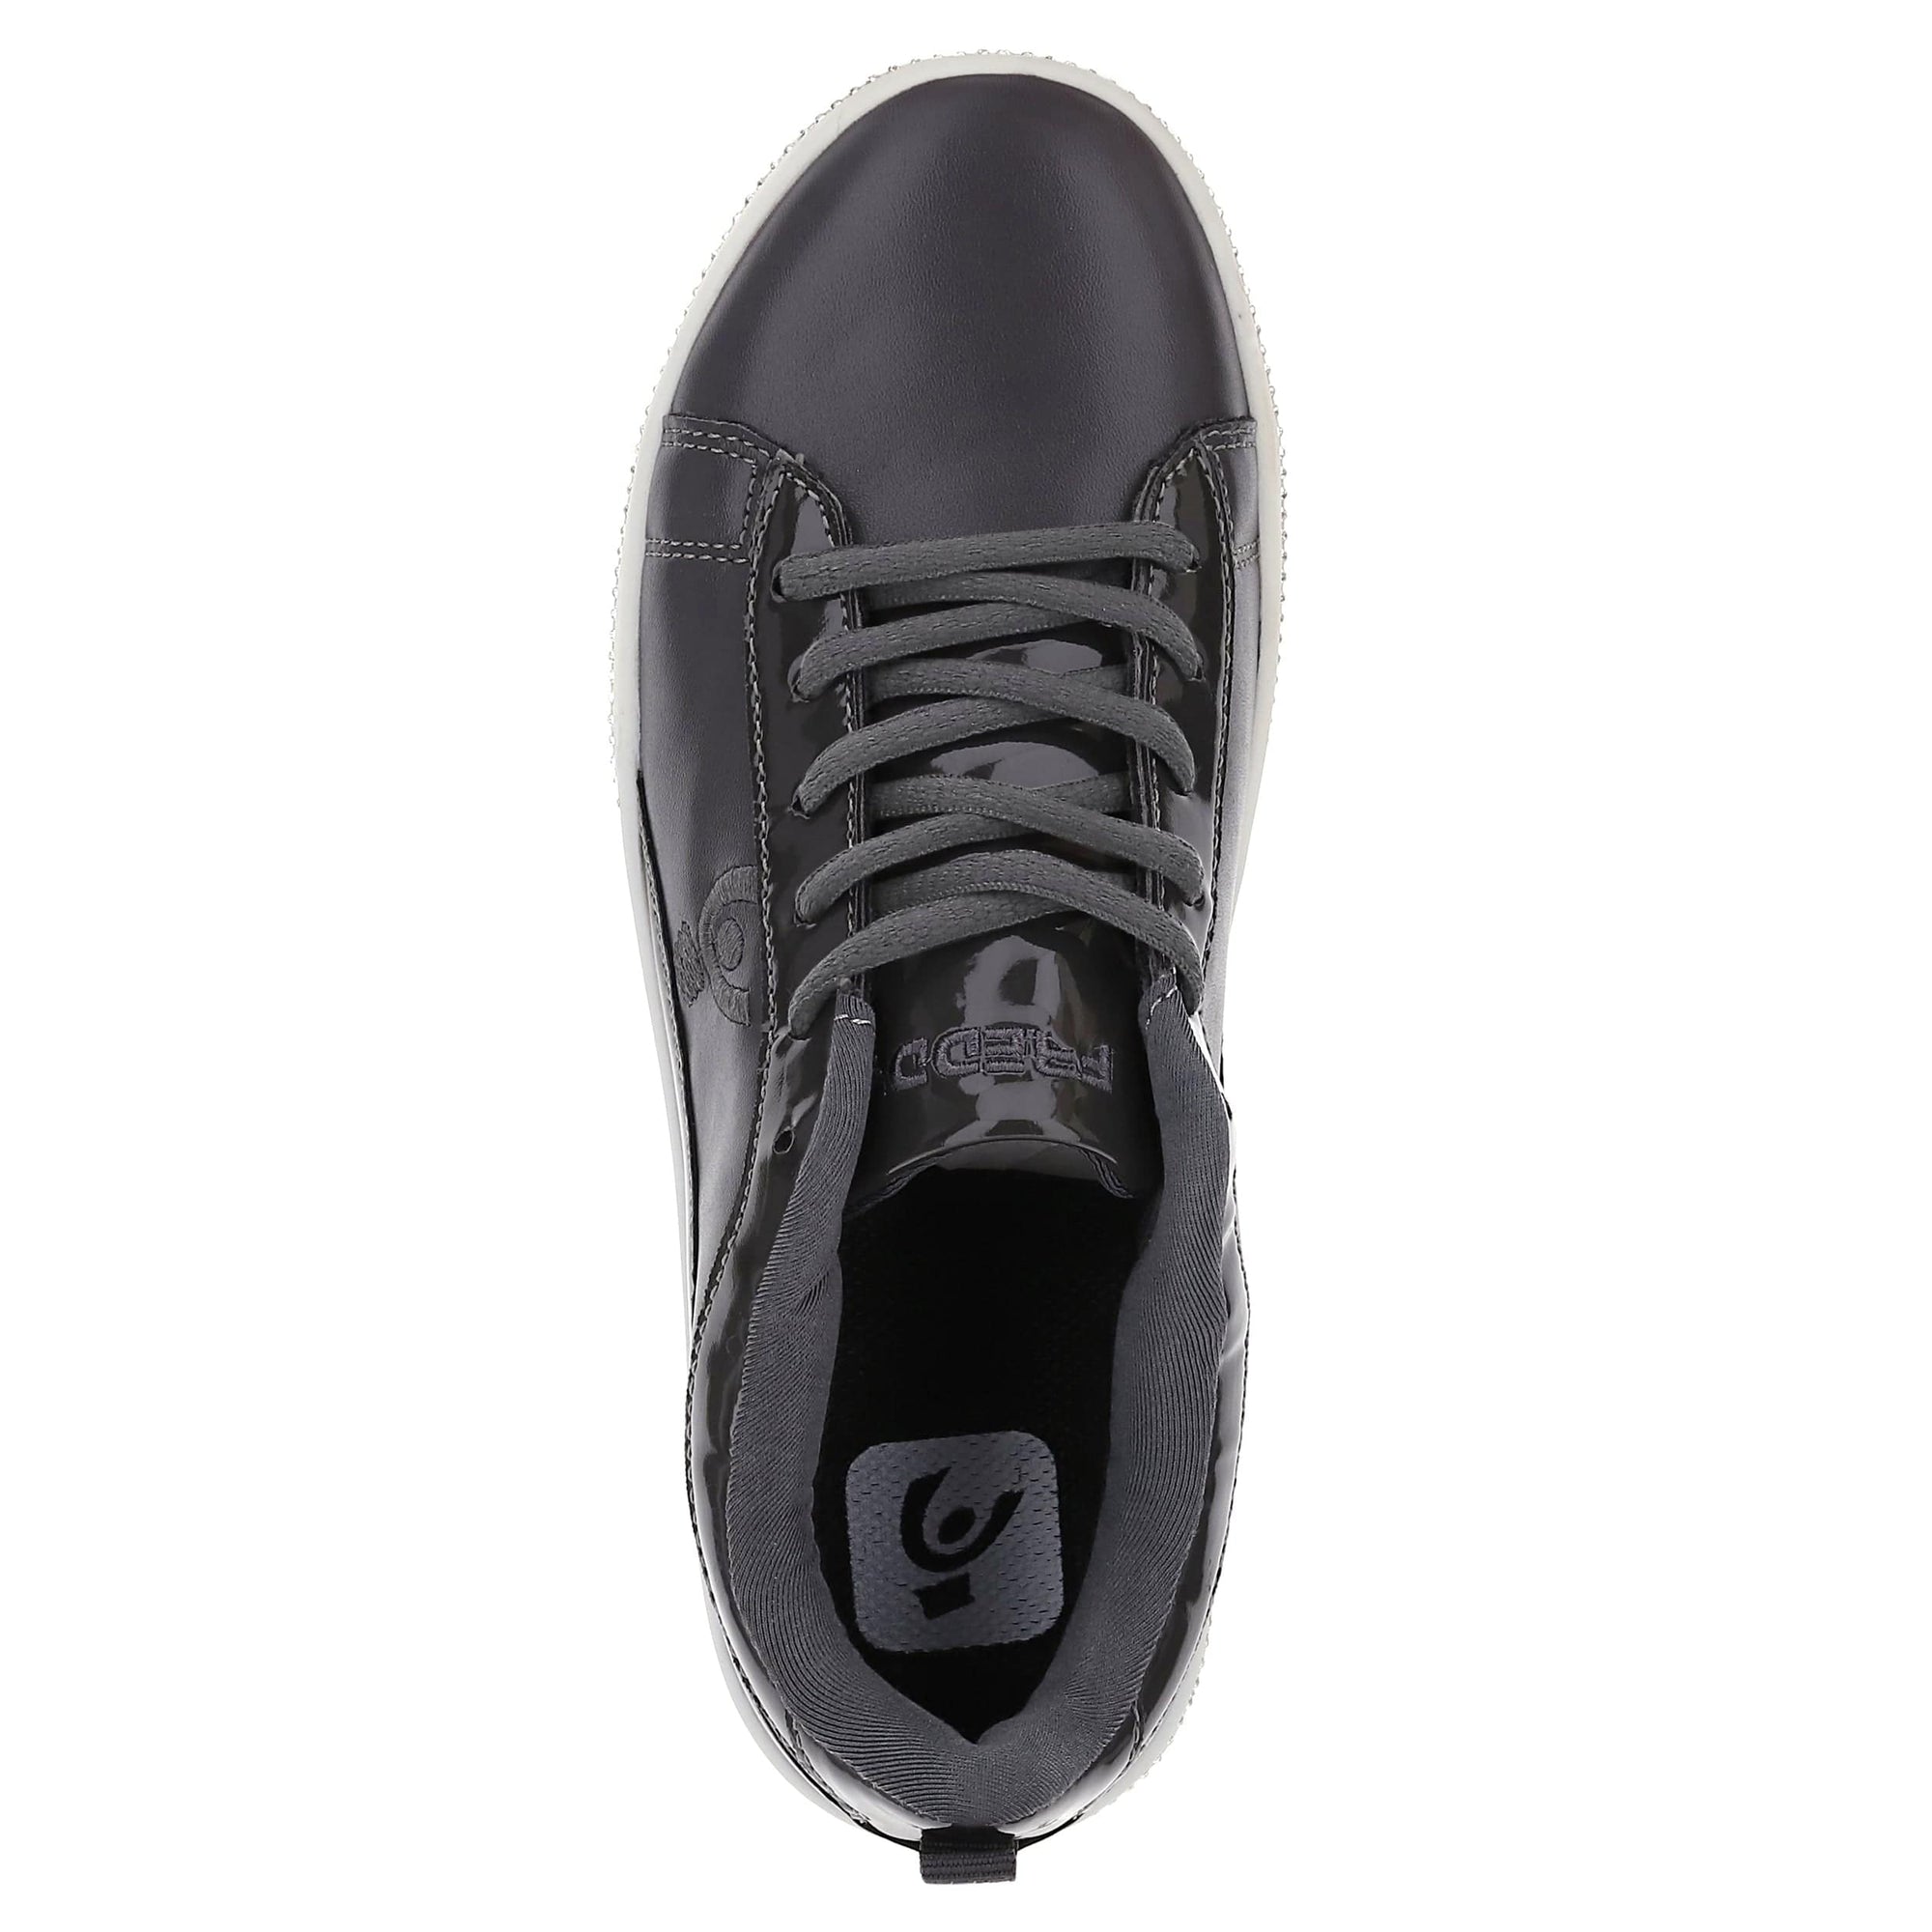 Women's Faux Leather Trainers - Lead 3